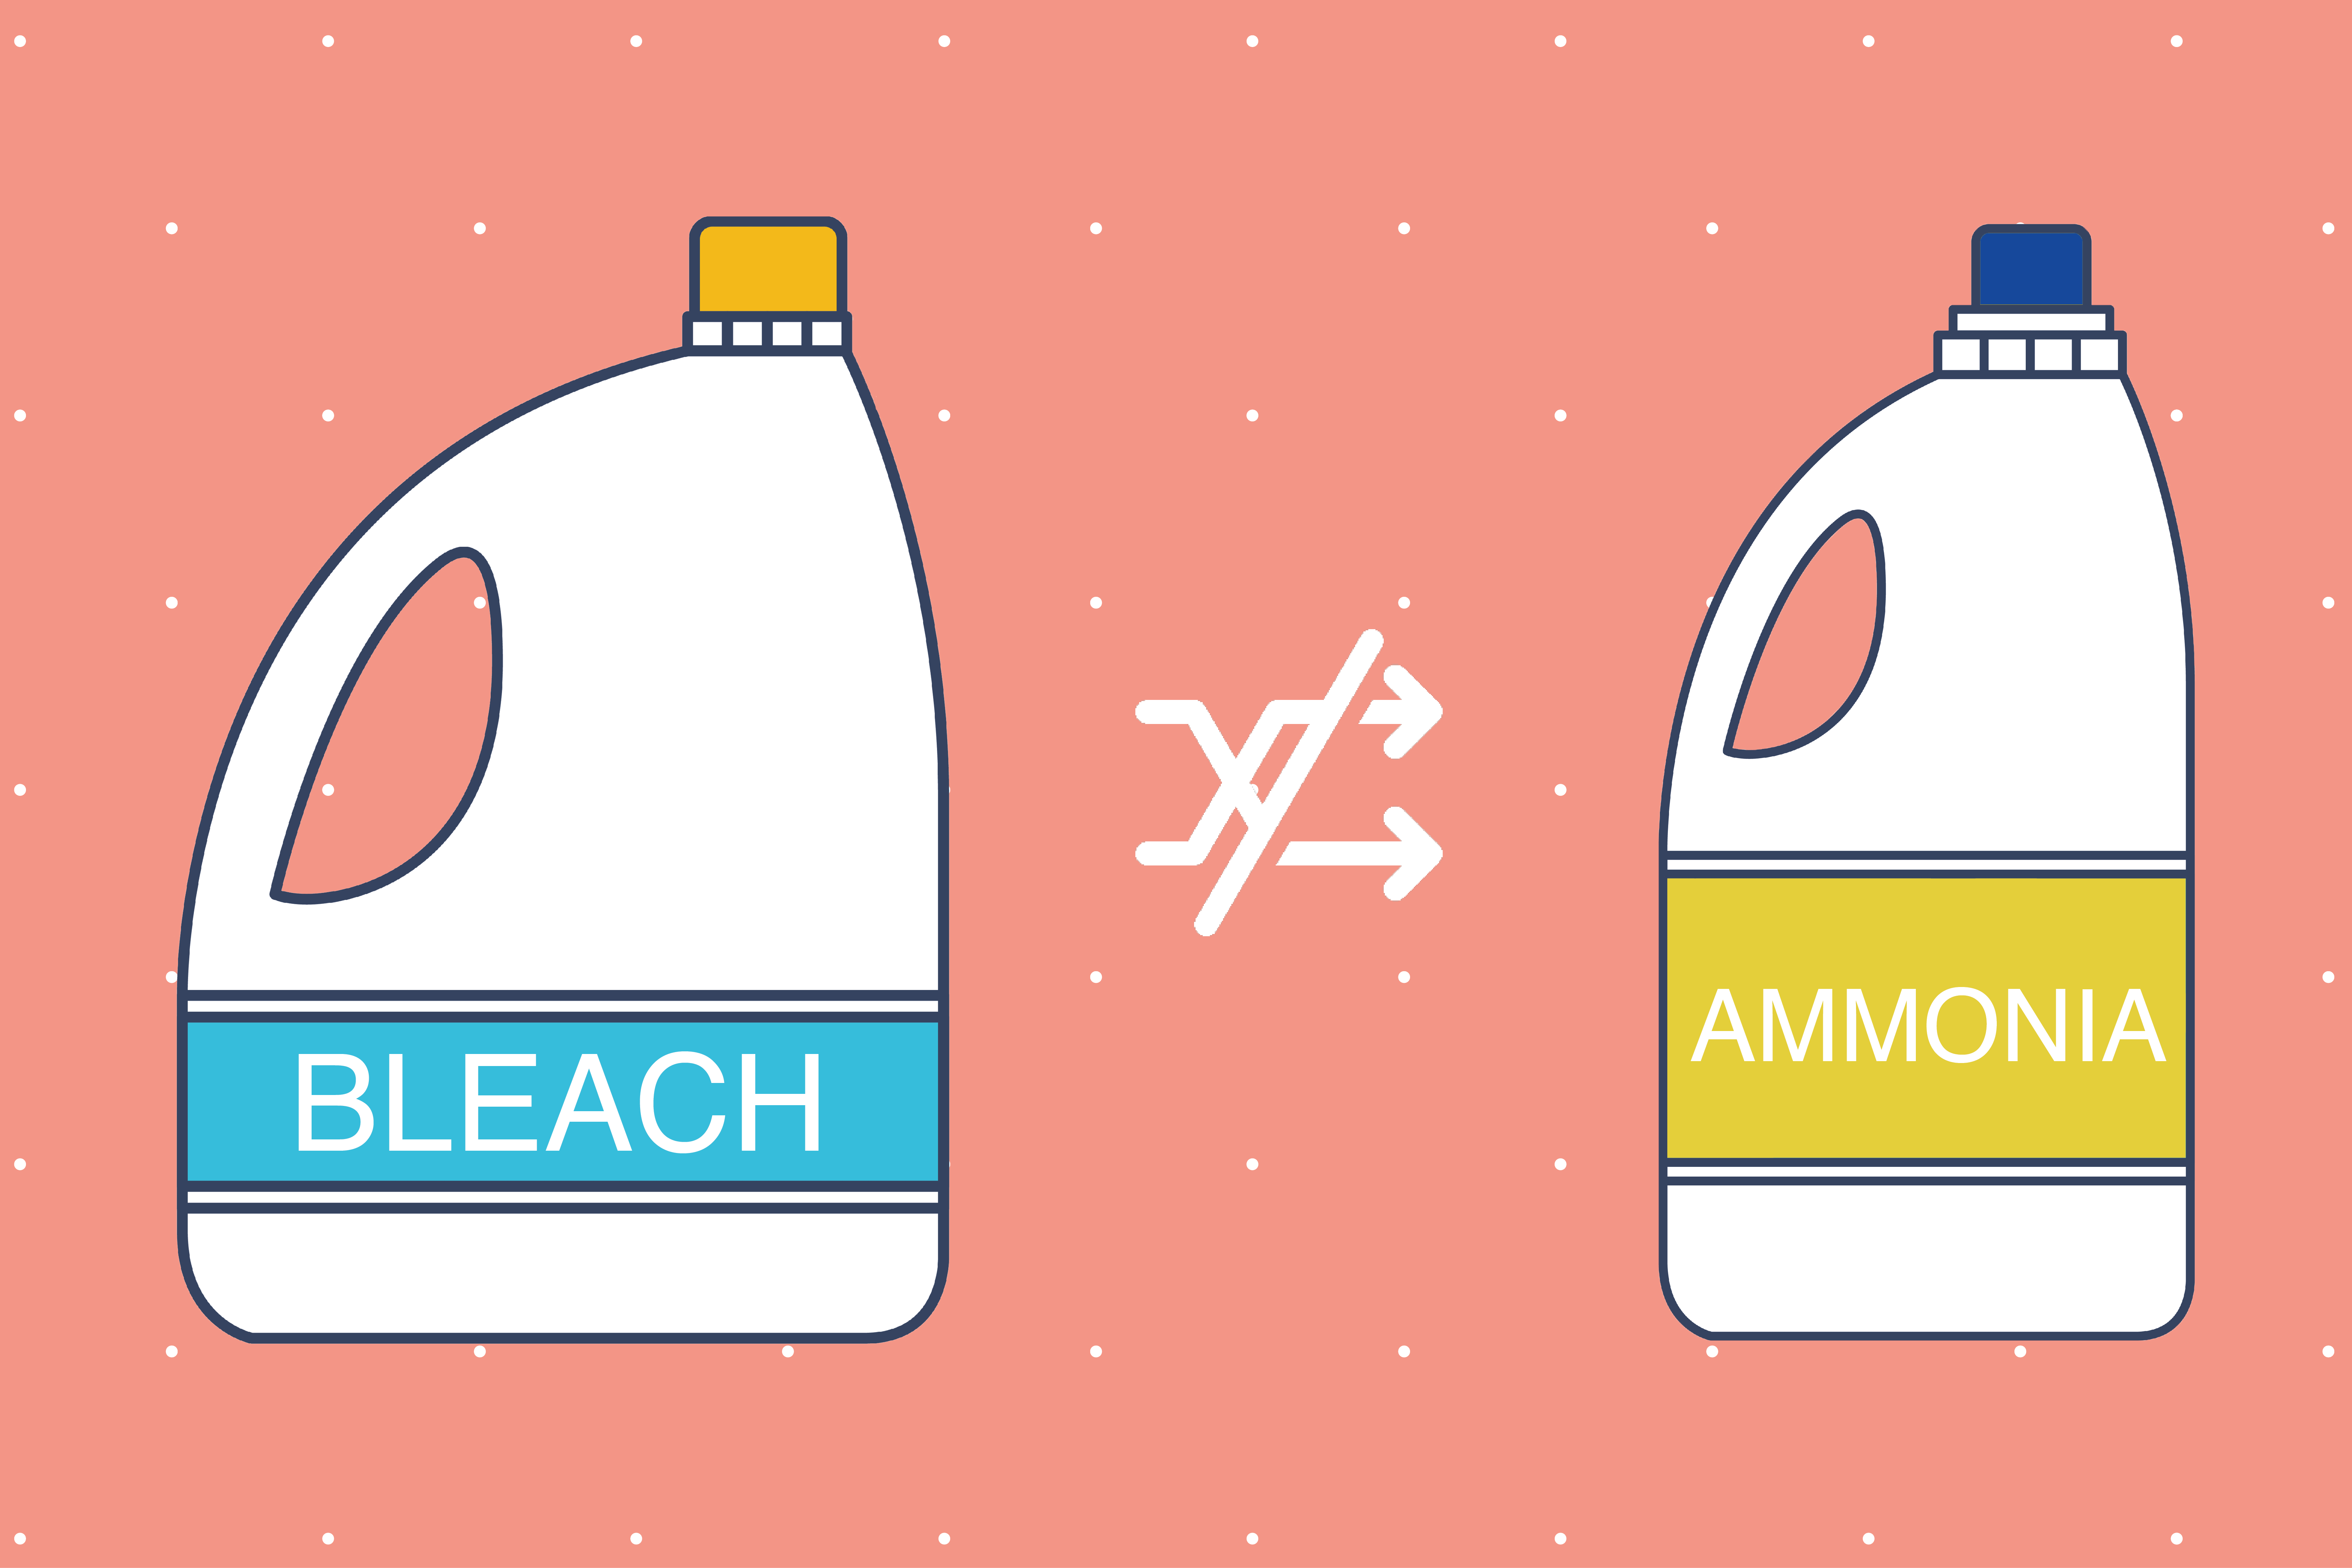 8 Cleaning Products You Should Never Mix